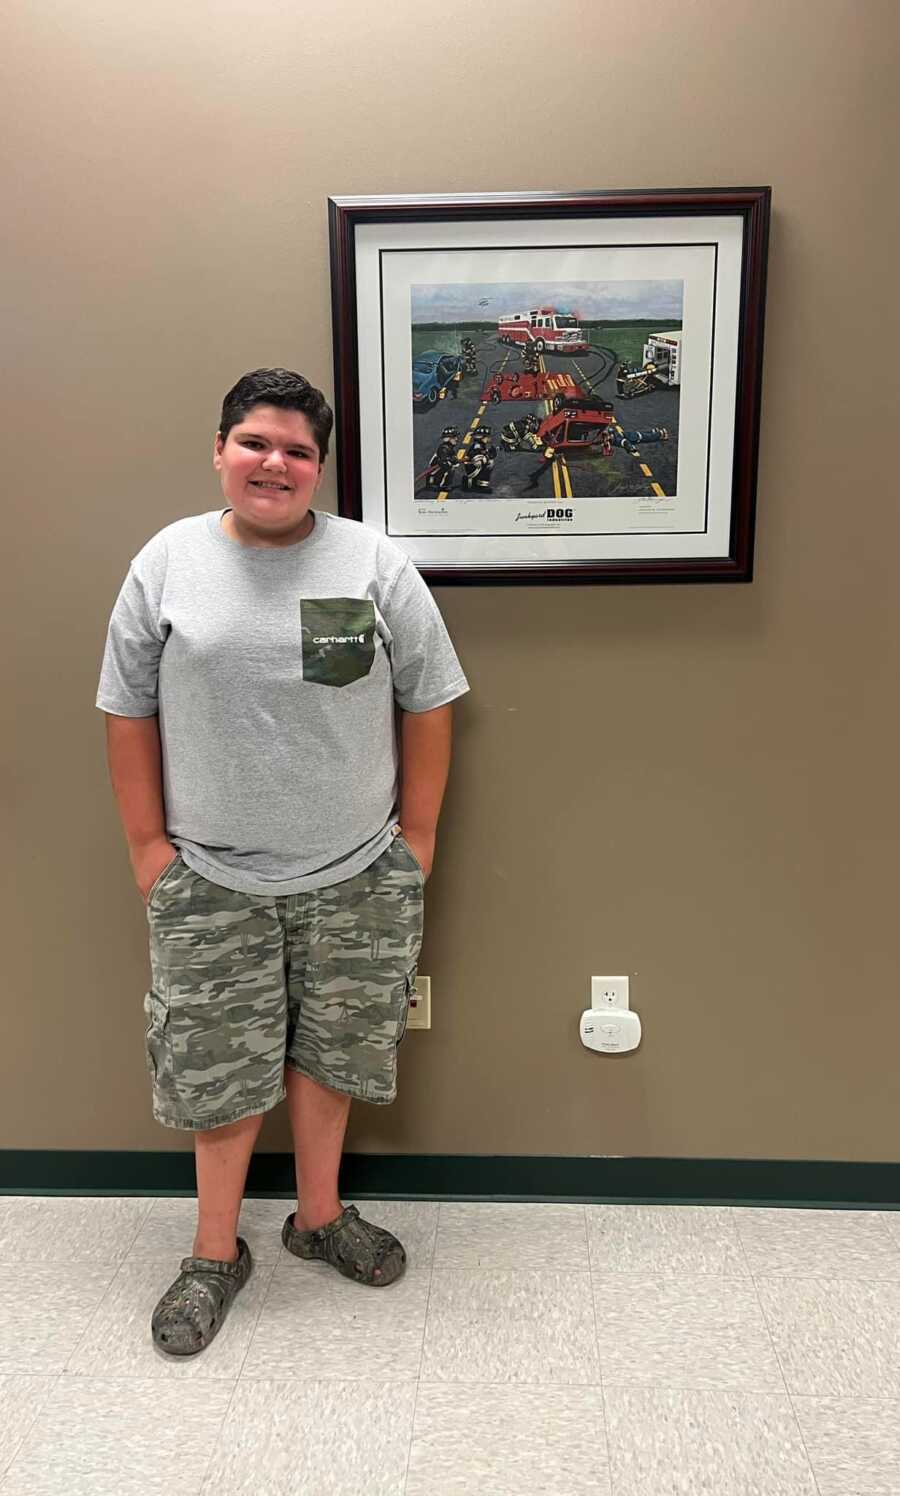 Autistic son standing by framed football photo wearing camouflage shorts and grey shirt